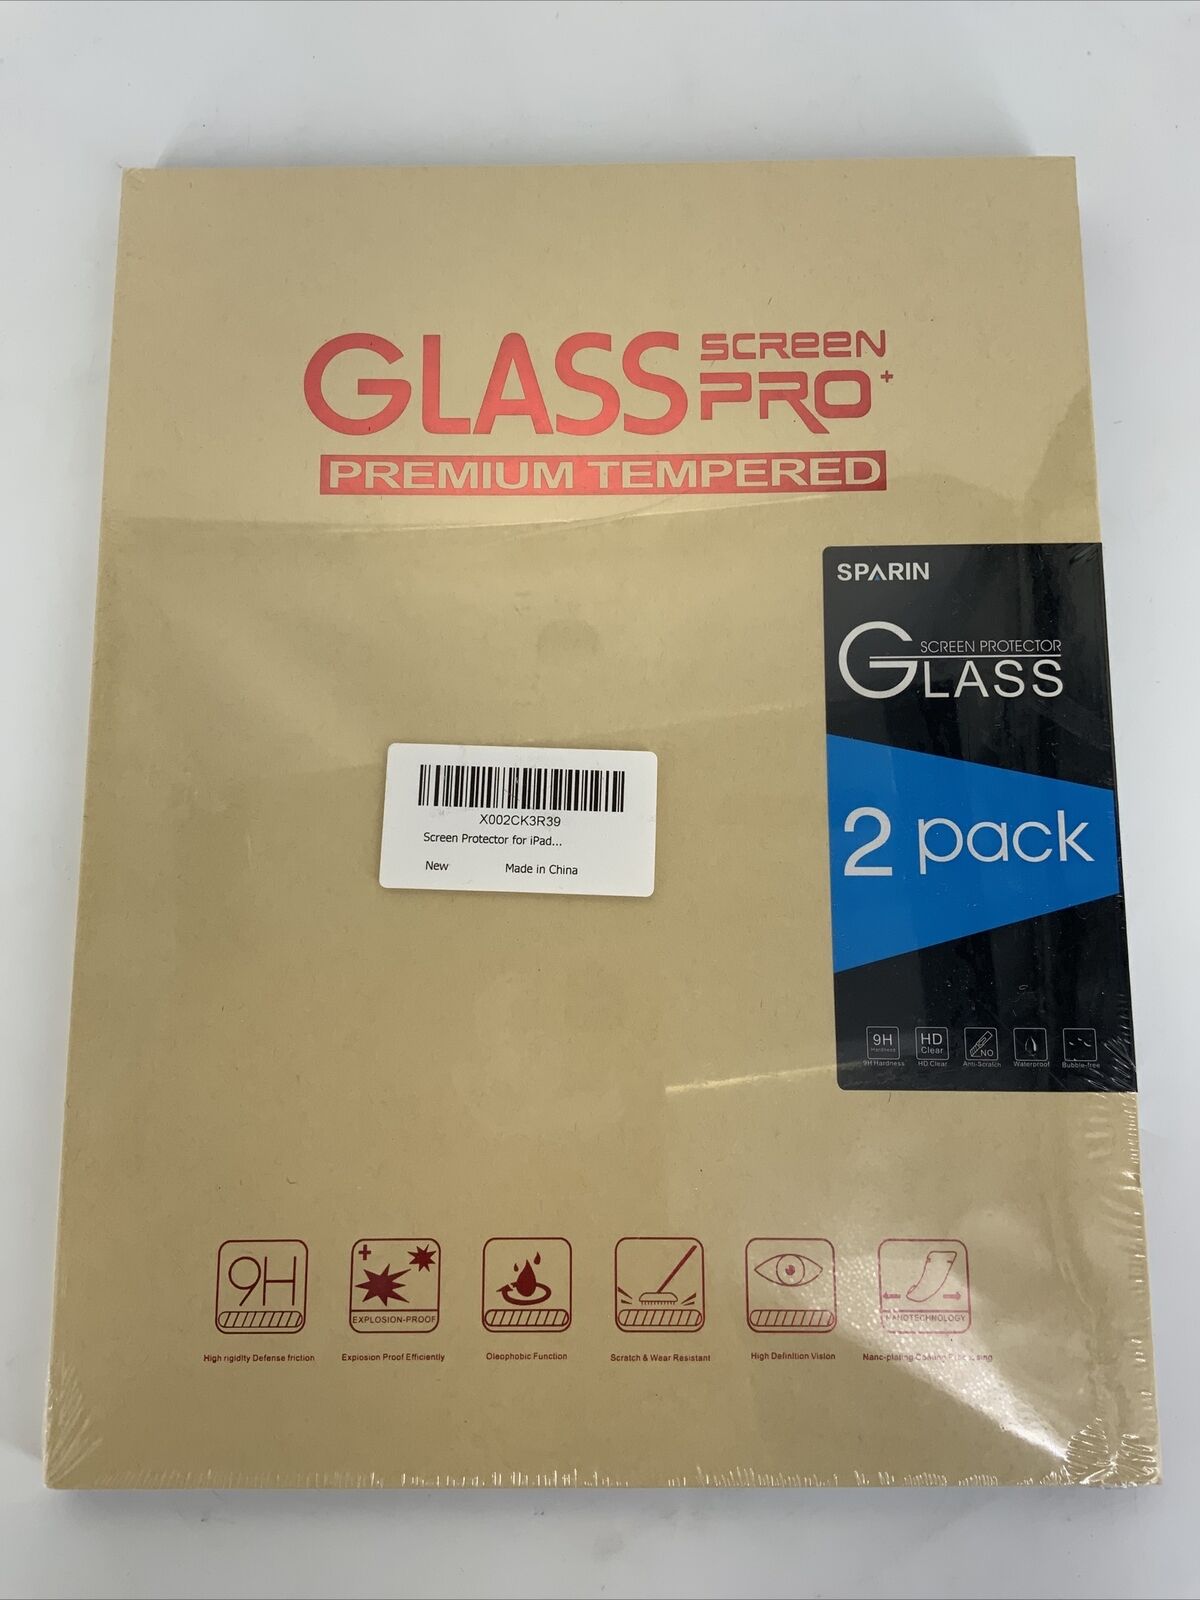 2-Pack Sparin Glass Screen Premium Tempered Screen Protector for iPad